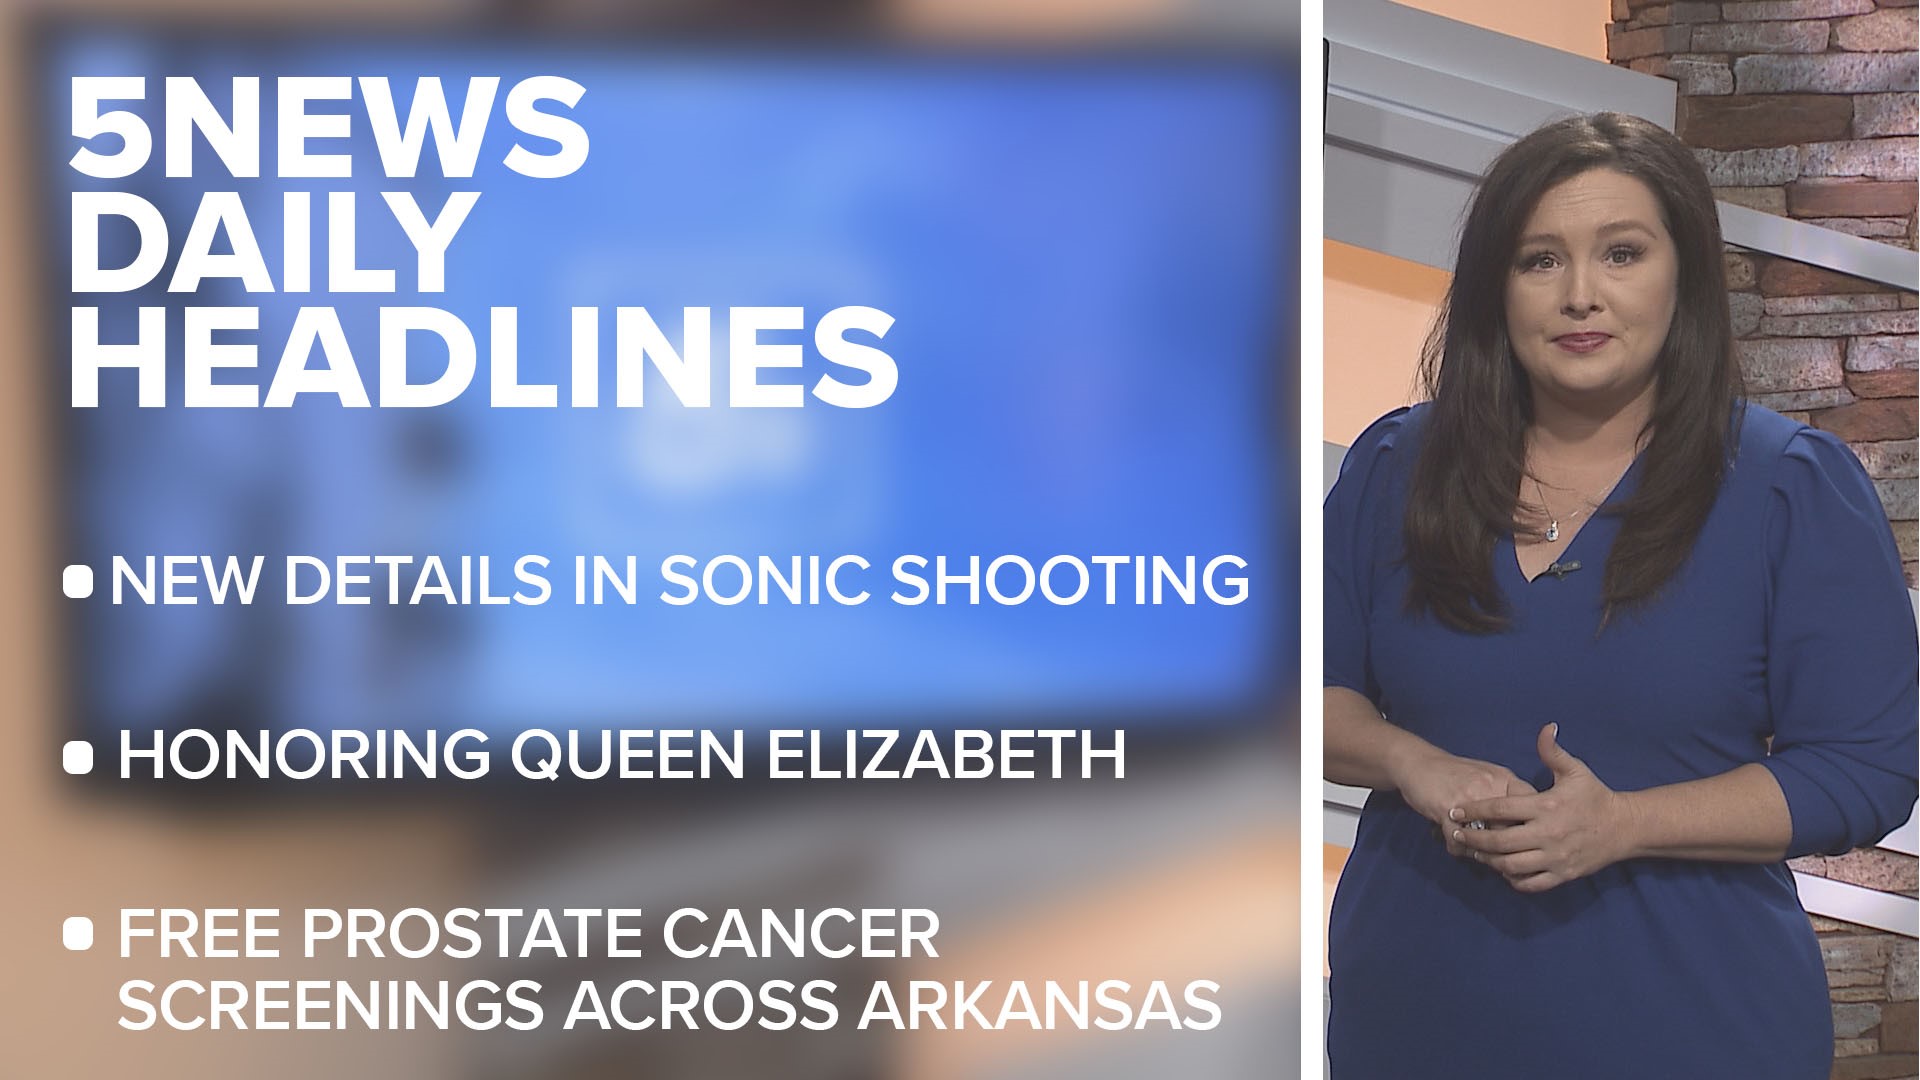 Daily headlines for local news across Northwest Arkansas and the River Valley for Sept. 20, 2022.